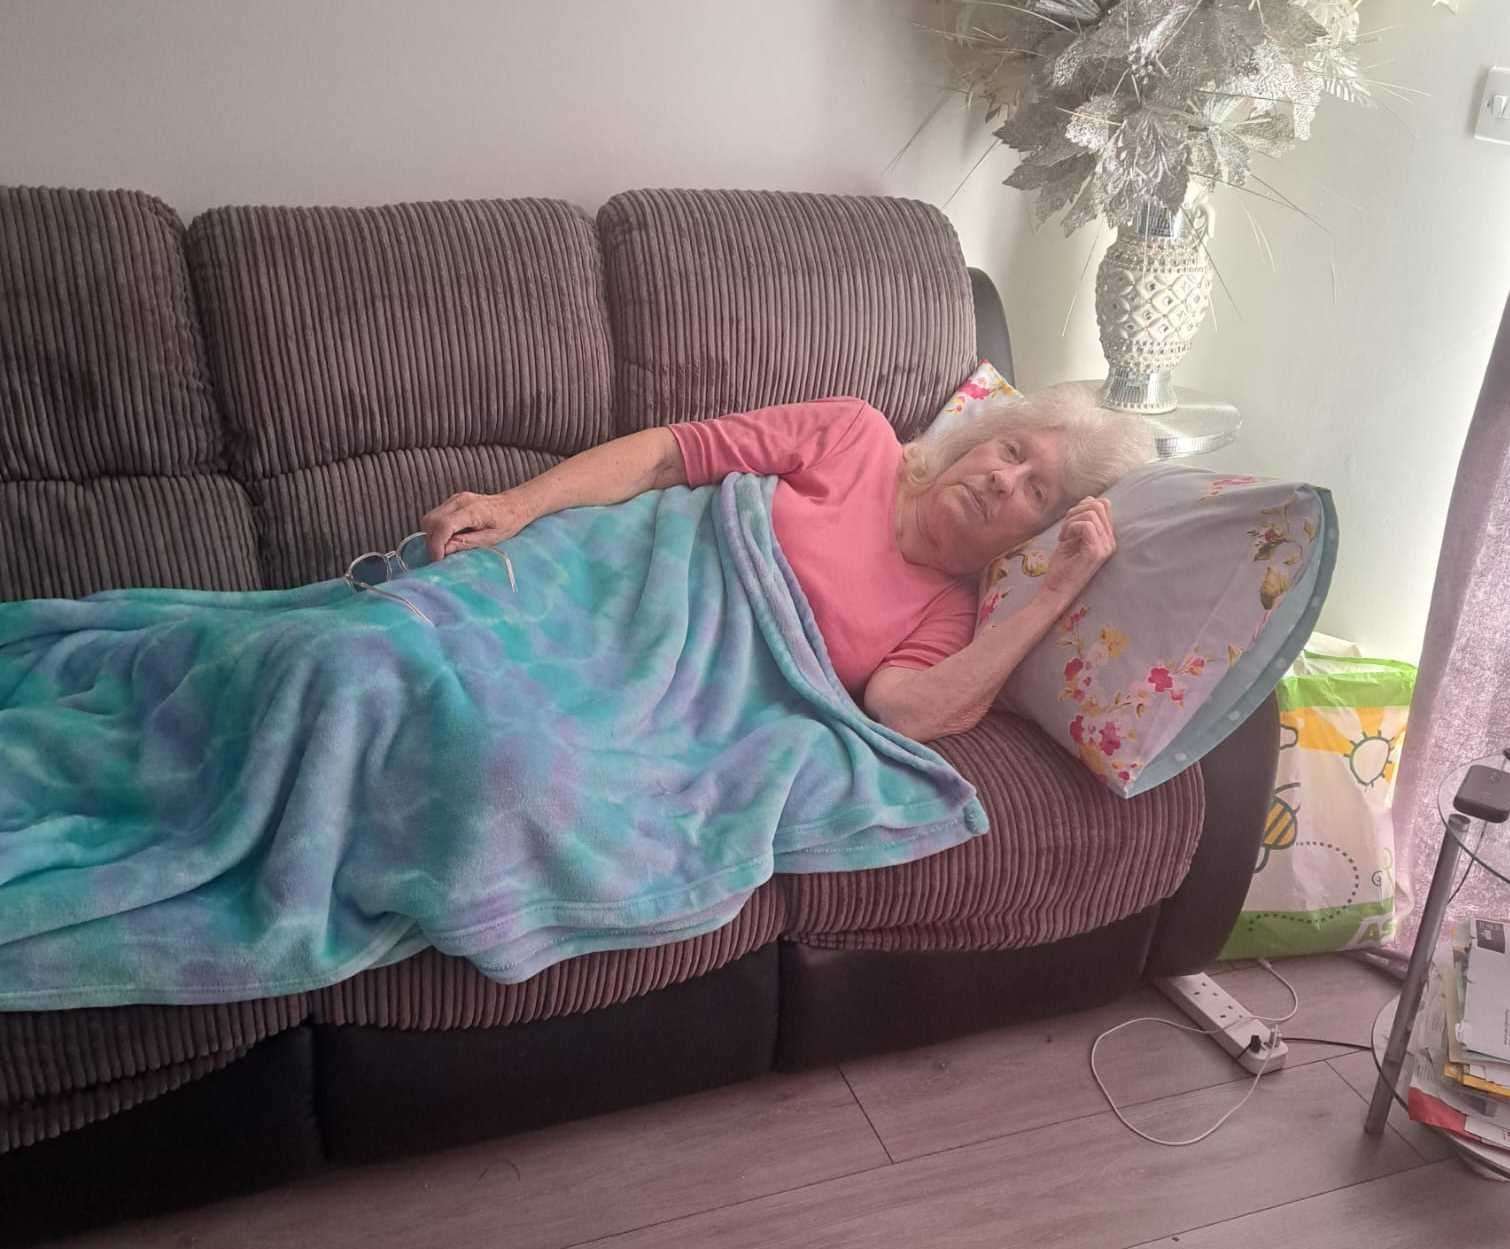 Doreen has been forced to move out and sleep on her son's couch